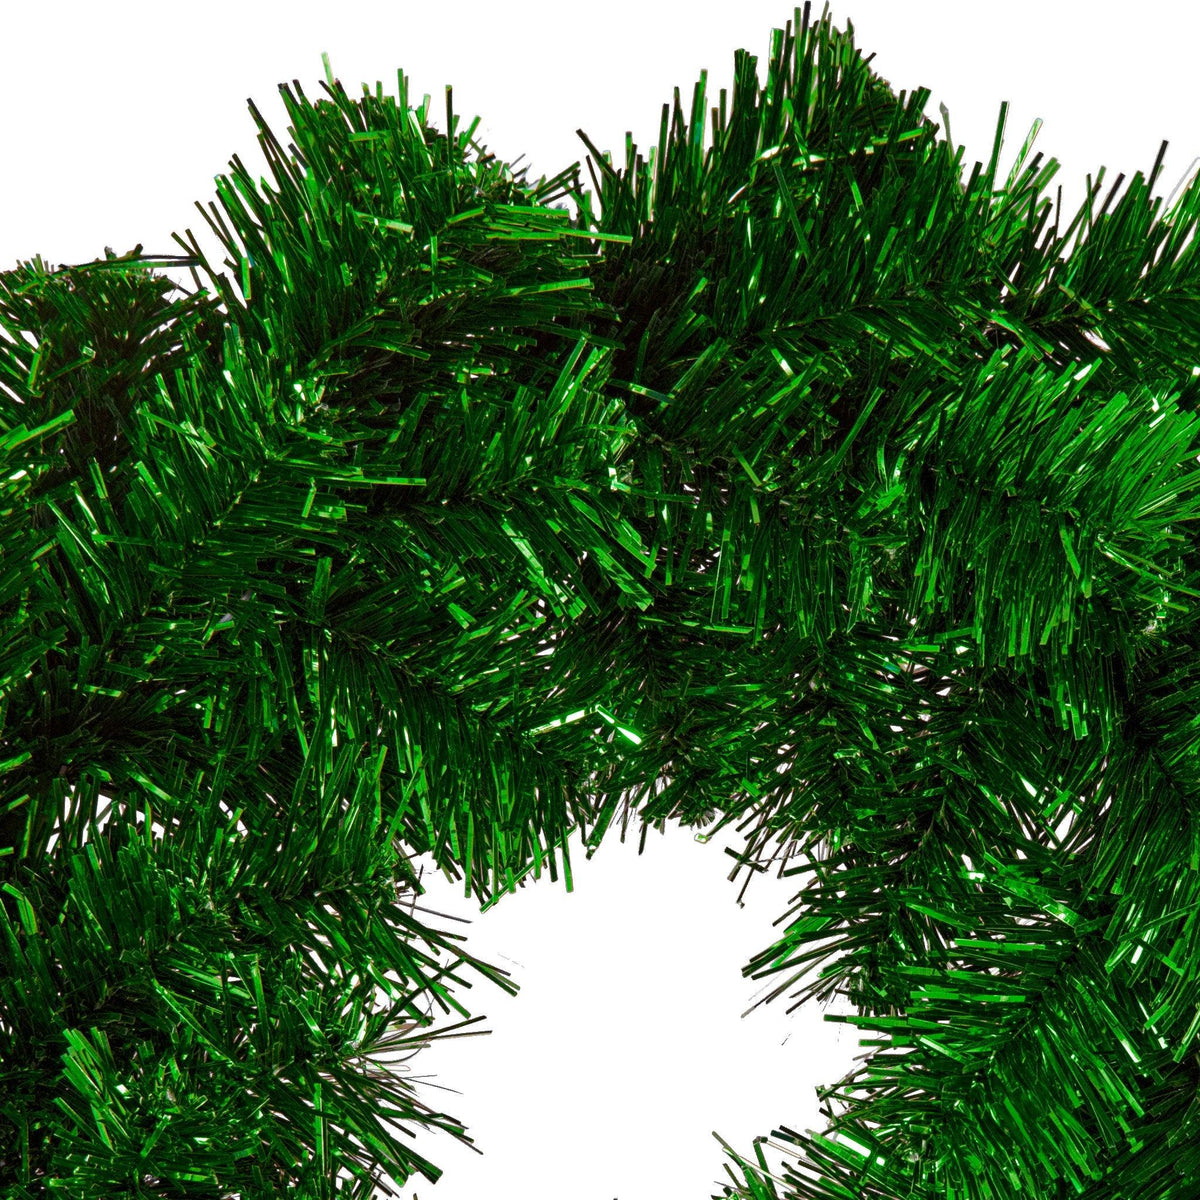 Top of the 18in Shiny Green Tinsel Christmas Wreath sold by Lee Display